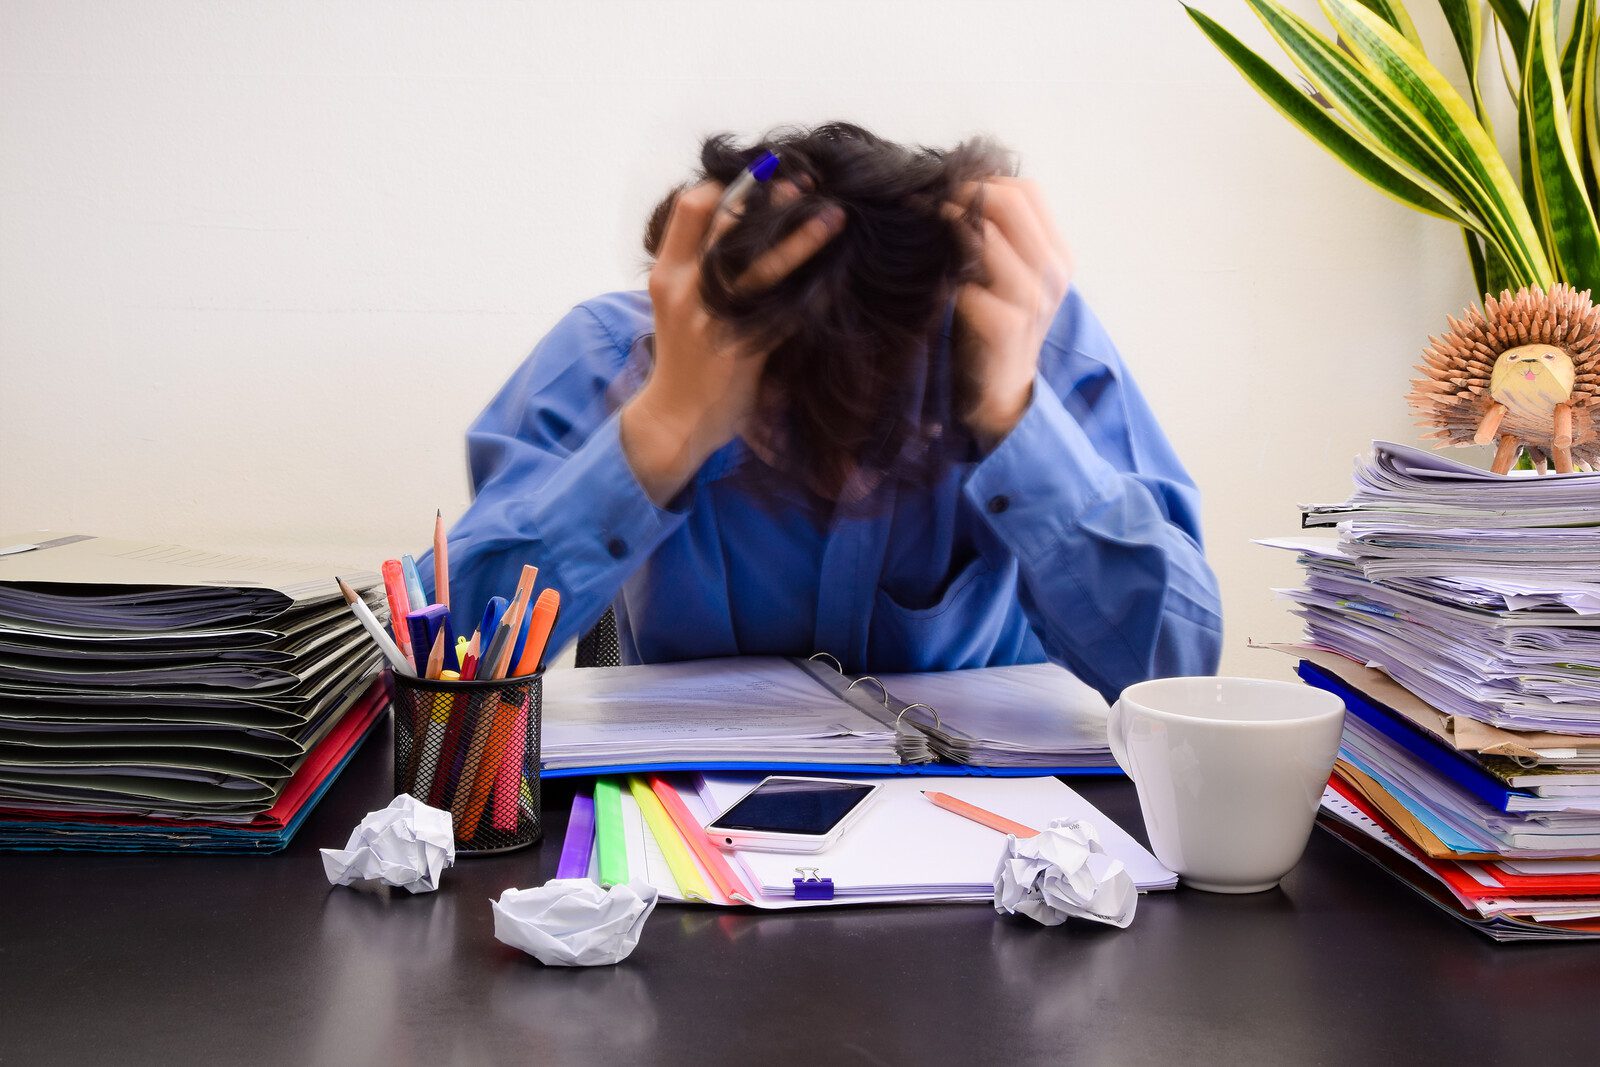 US WORKER BURNOUT LEVELS DROP DURING FIRST MONTHS OF COVID